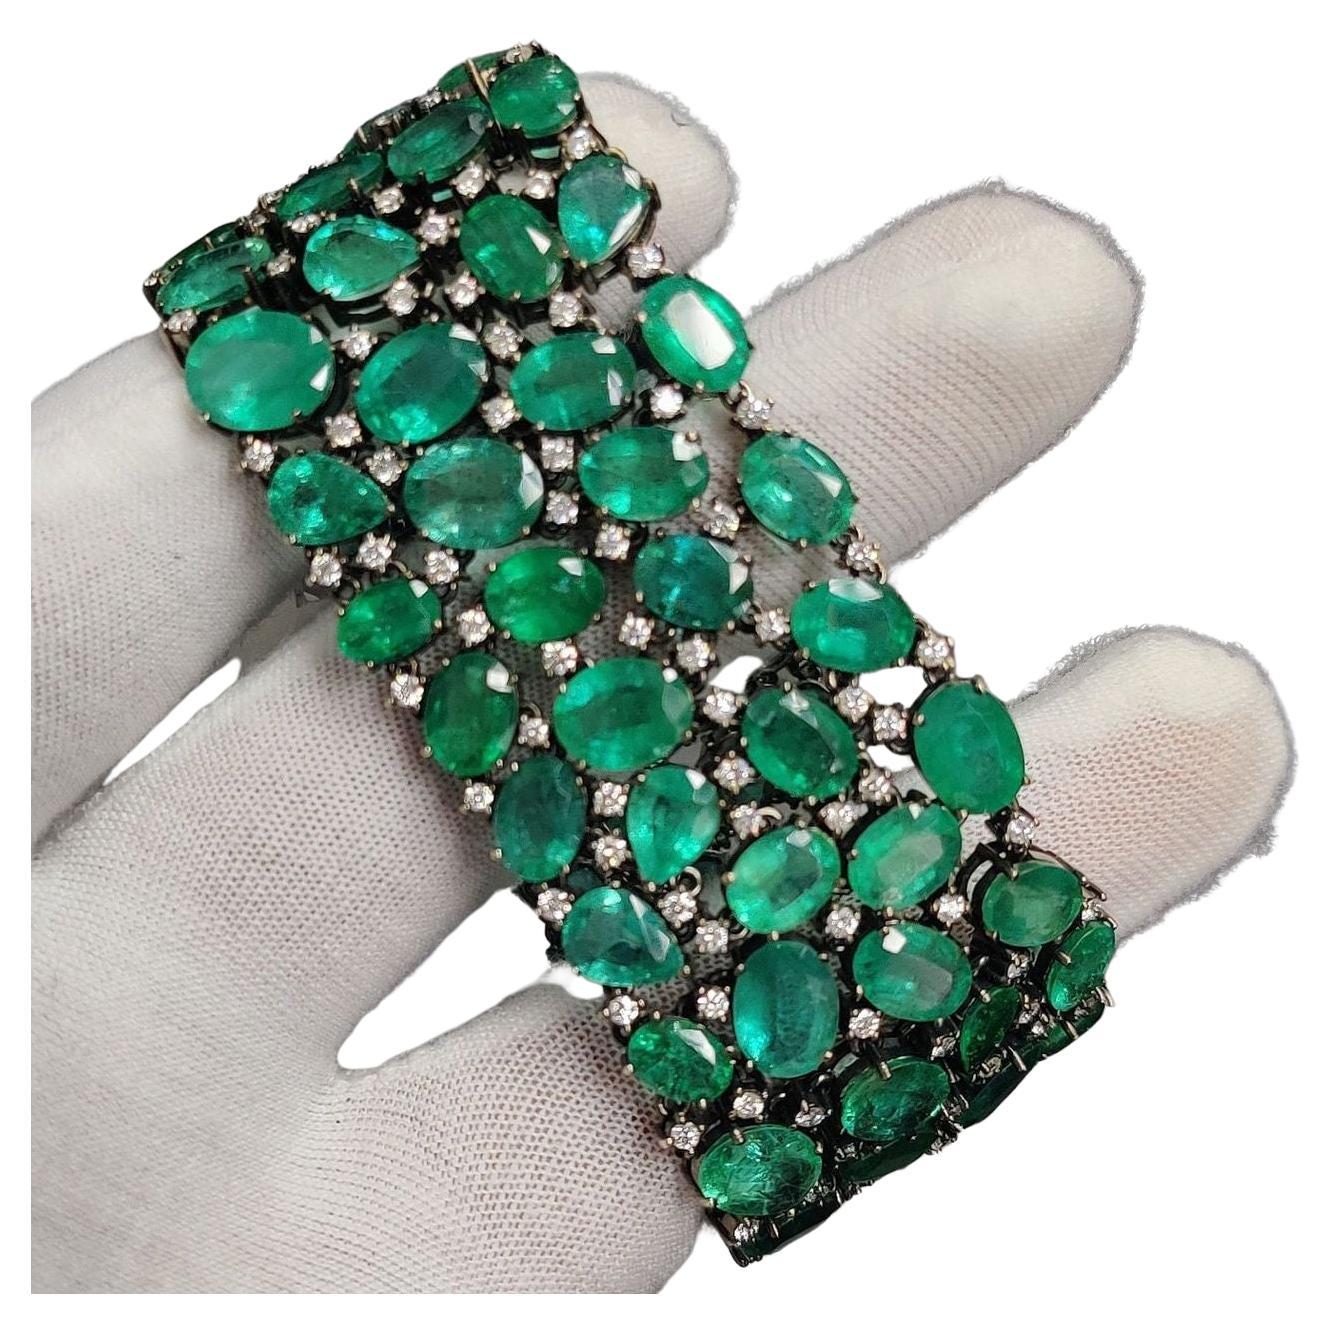 EXCEPTIONAL 115 Carat Zambian Green Emerald 18k White Gold Bracelet  For Sale